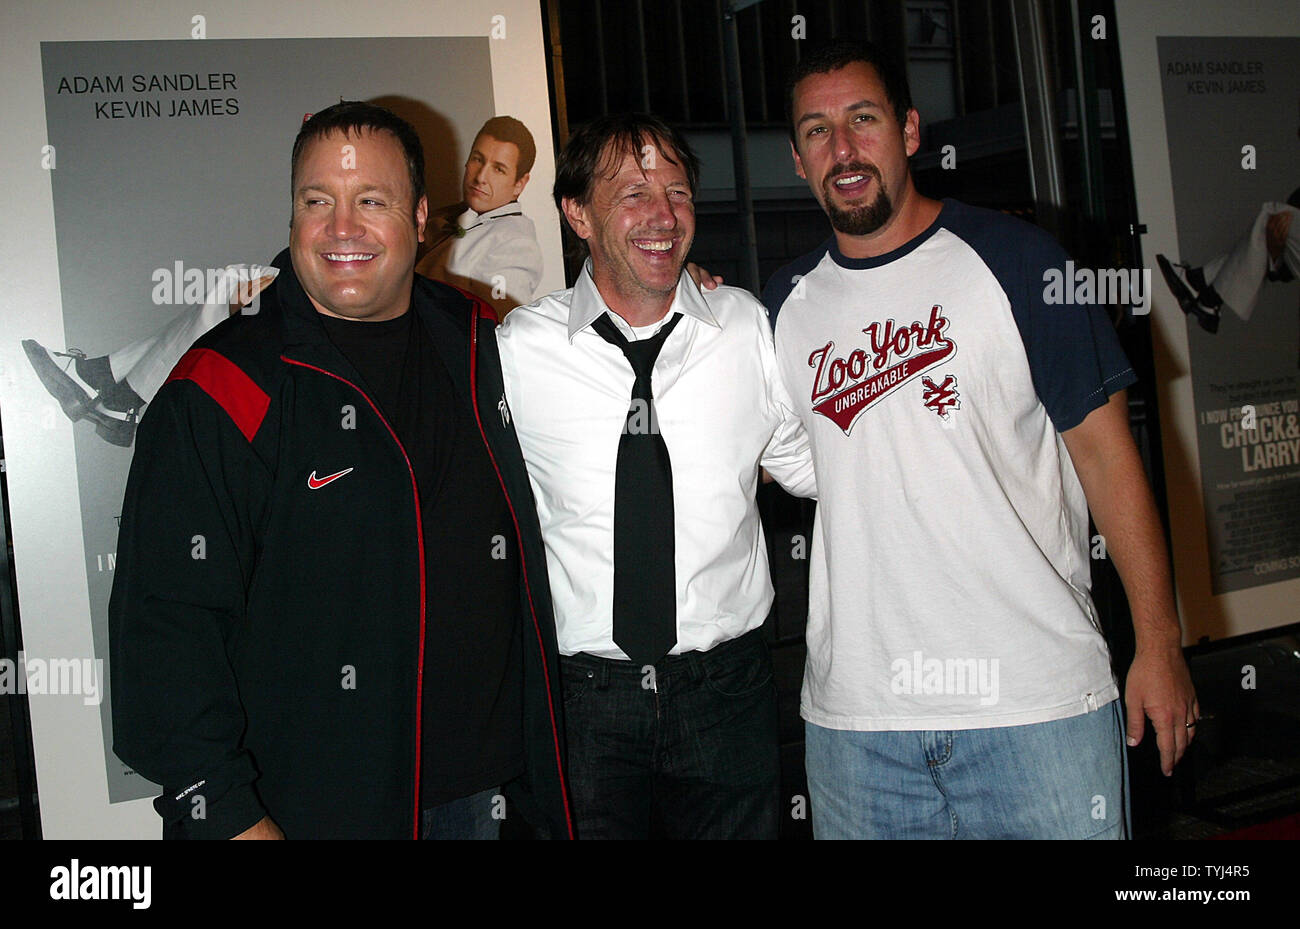 (L-R) Kevin James,  director Dennis Dugan, and Adam Sandler arrive for a special screening of their new movie 'I Now Pronounce You Chuck & Larry' at the Ziegfeld Theater in New York on July 18, 2007.  (UPI Photo/Laura Cavanaugh) Stock Photo